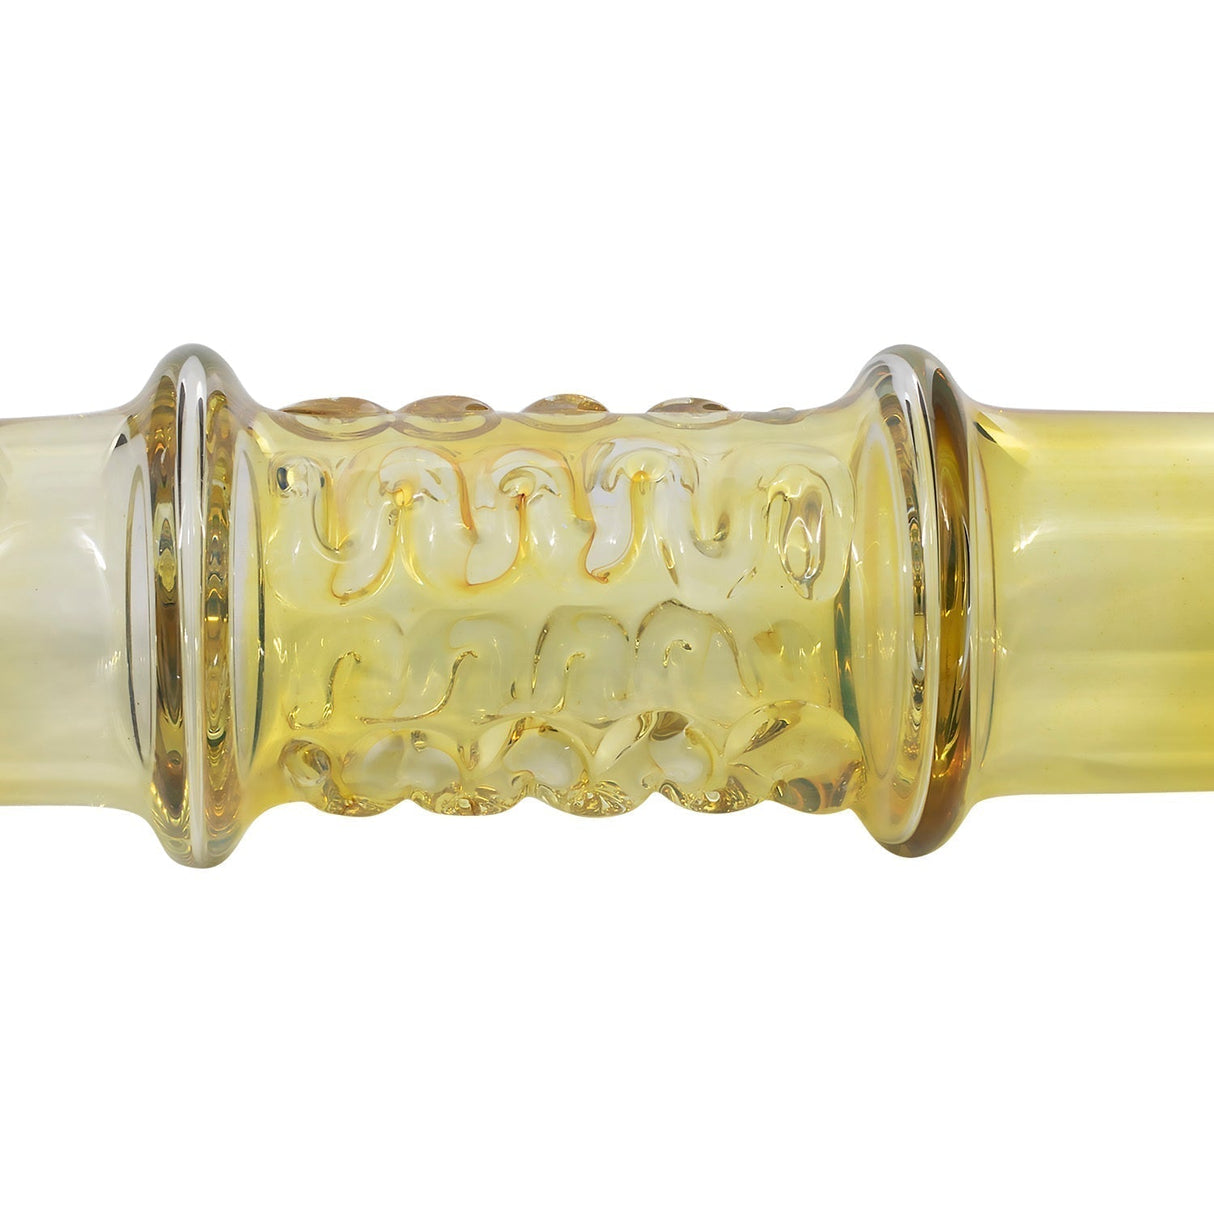 LA Pipes Silver Fumed Steamroller - Compact 5" Hand Pipe with Intricate Design